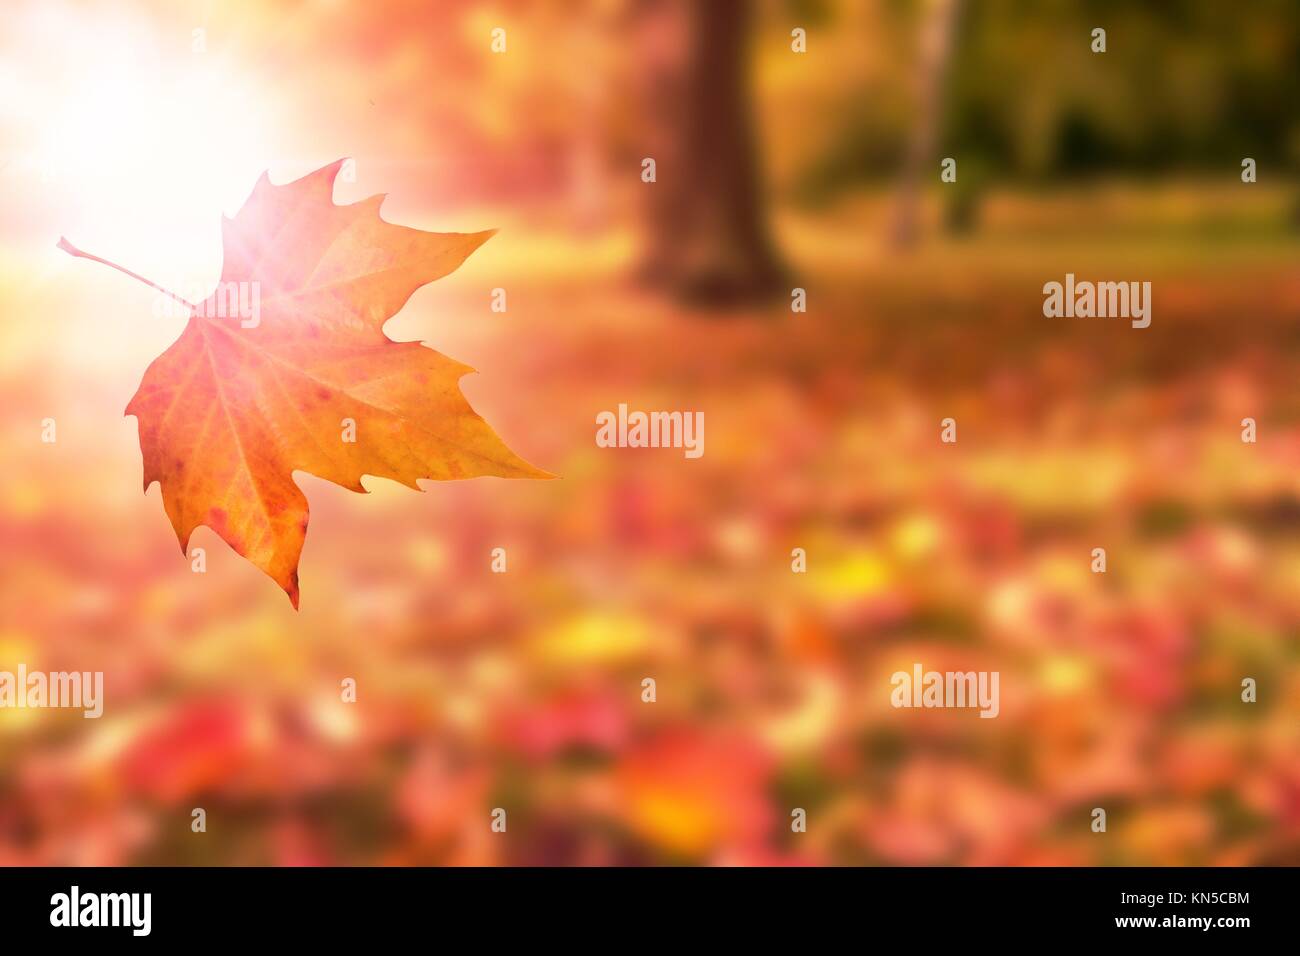 autumn background with single leave. Stock Photo